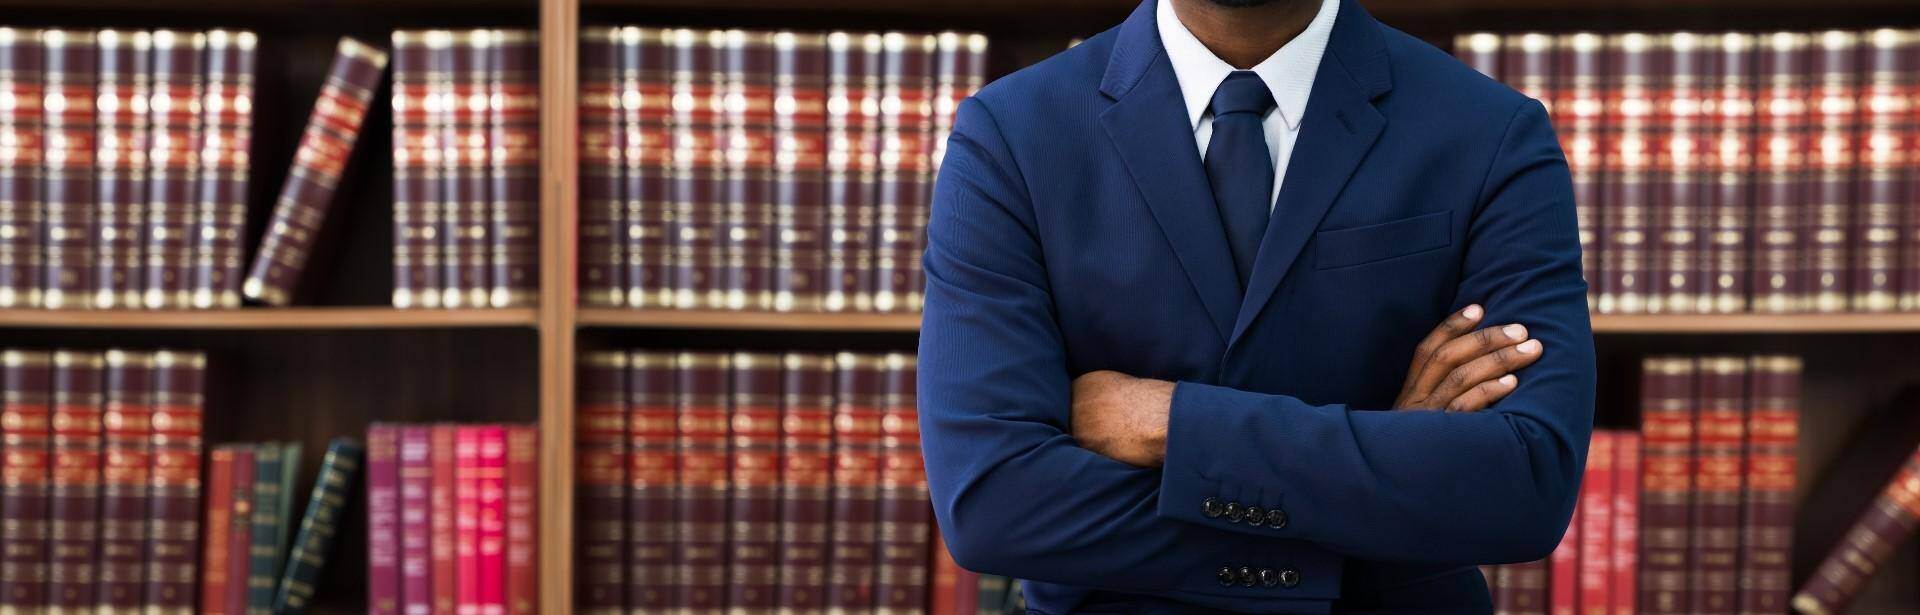 A black lawyer standing in front of a bookshelf of law book in Albany, Georgia